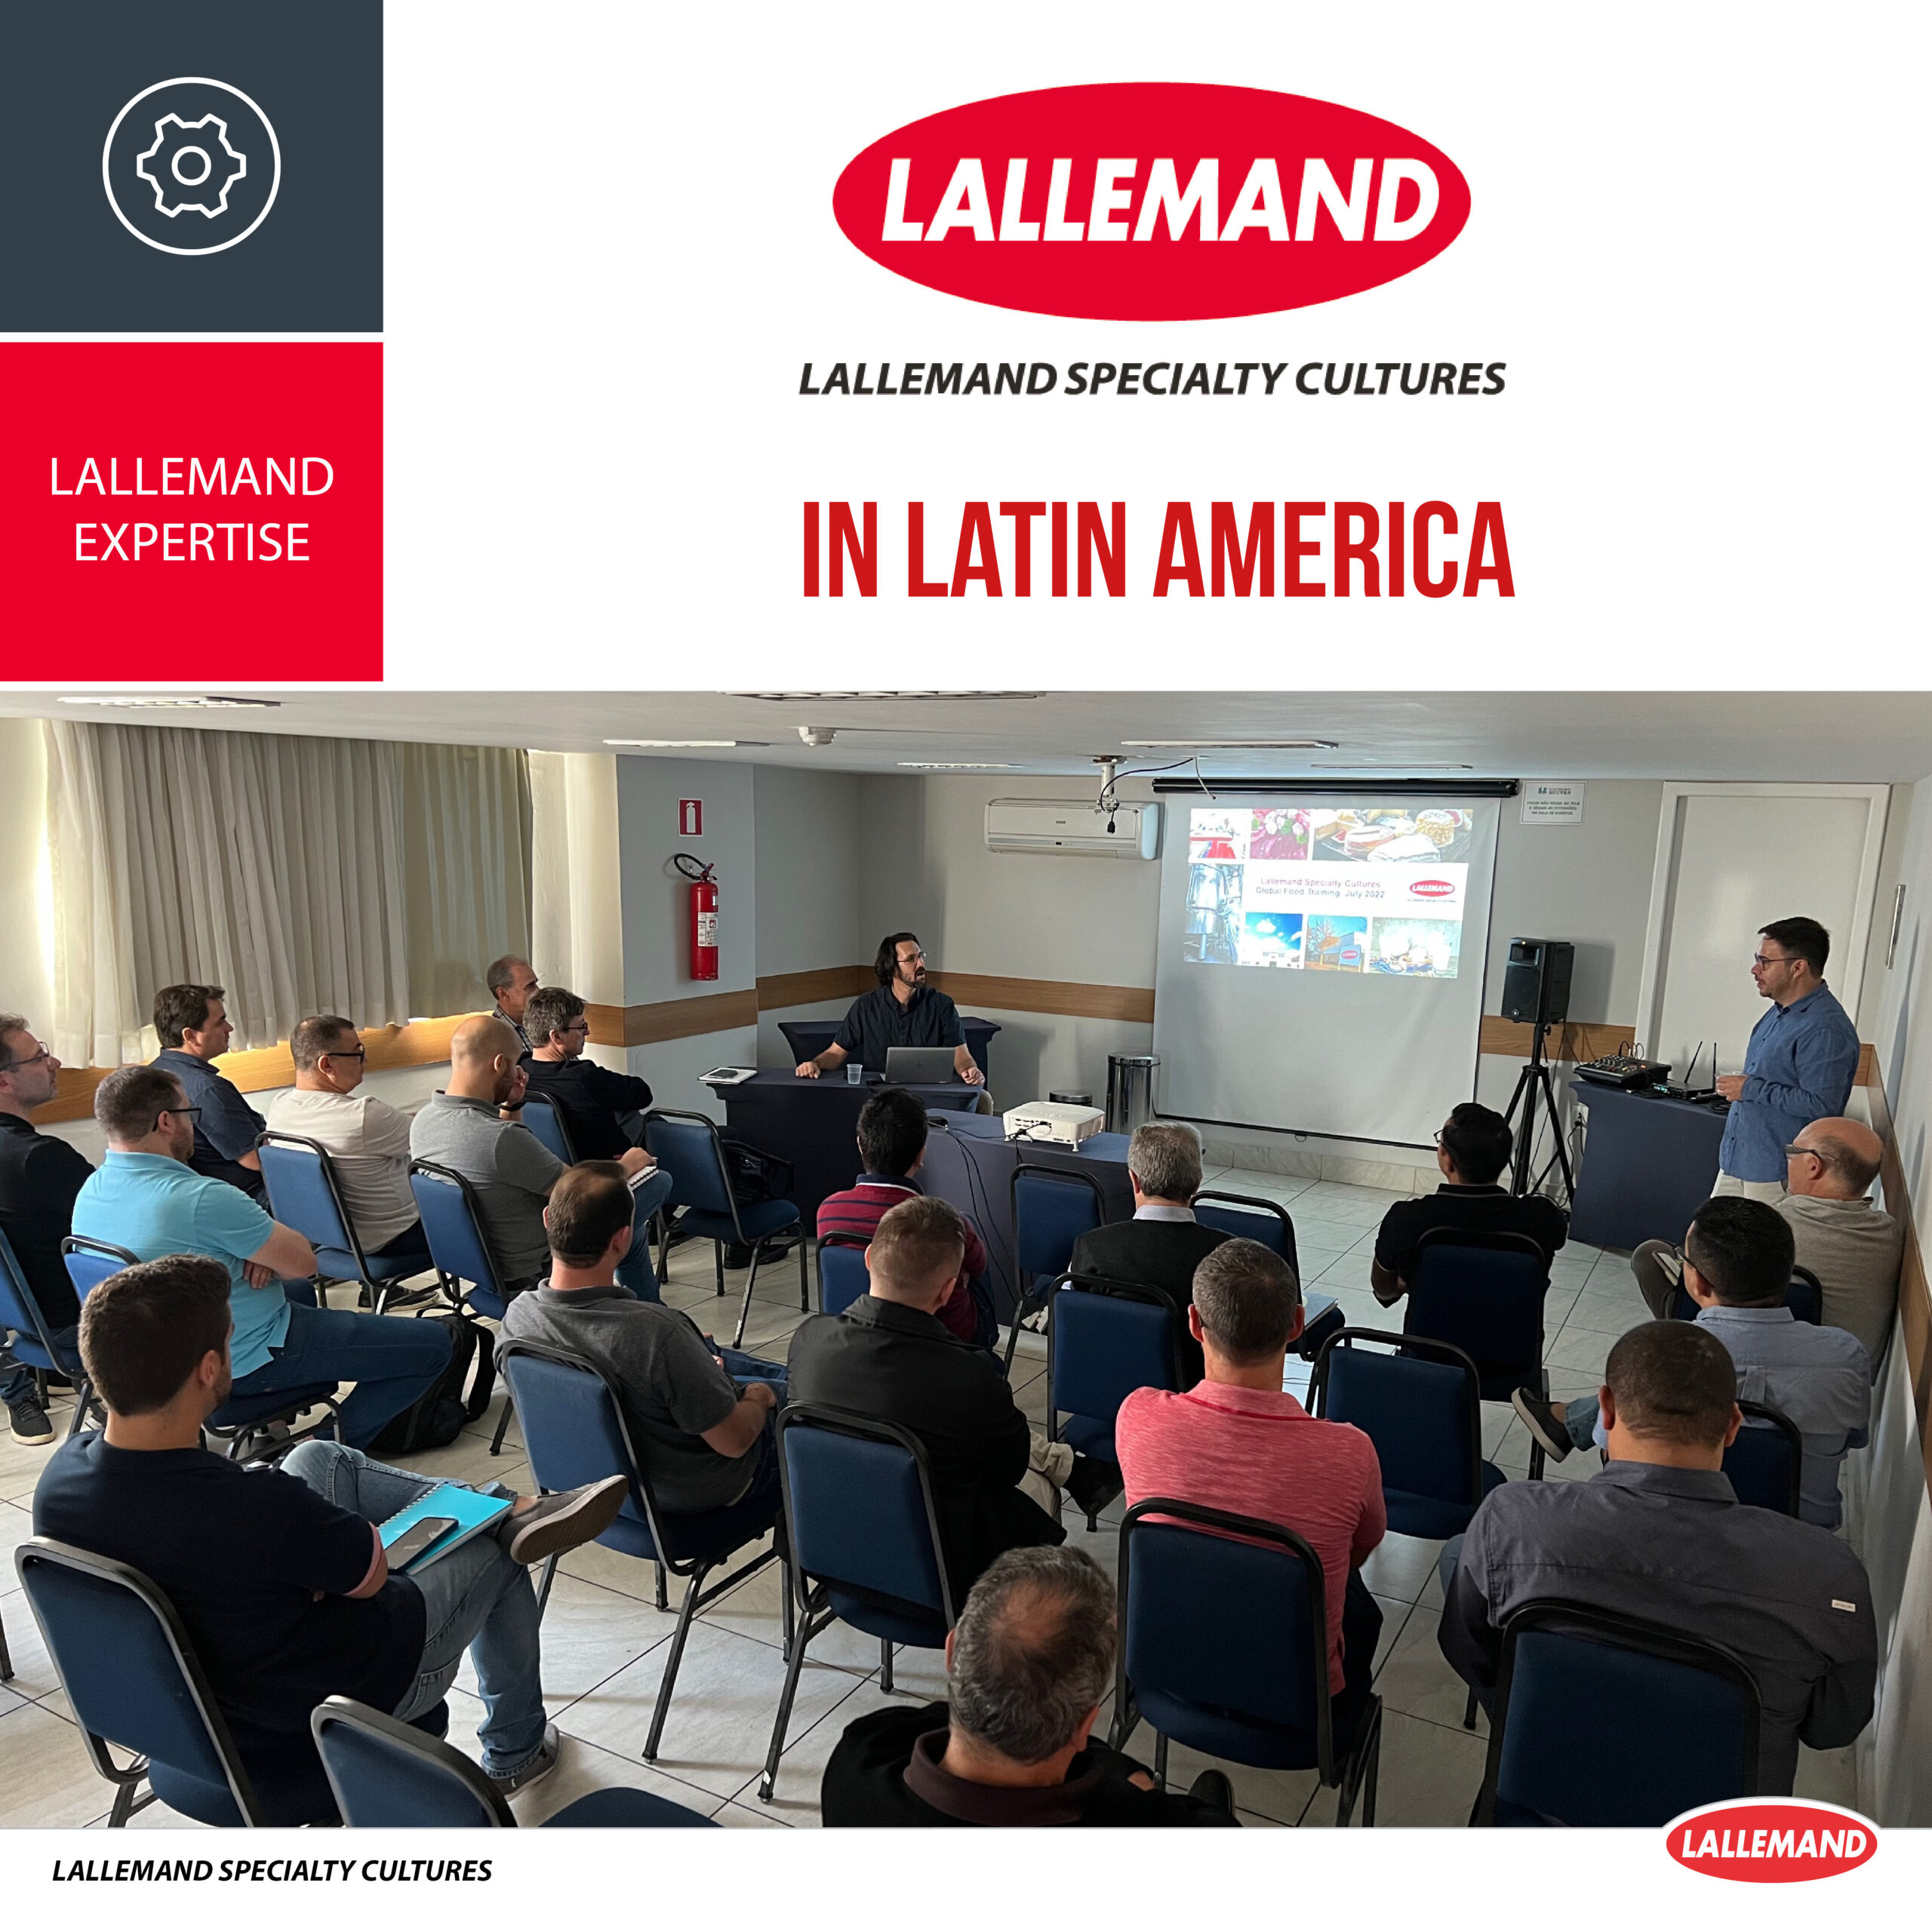 Throwback to our business journey in LATAM